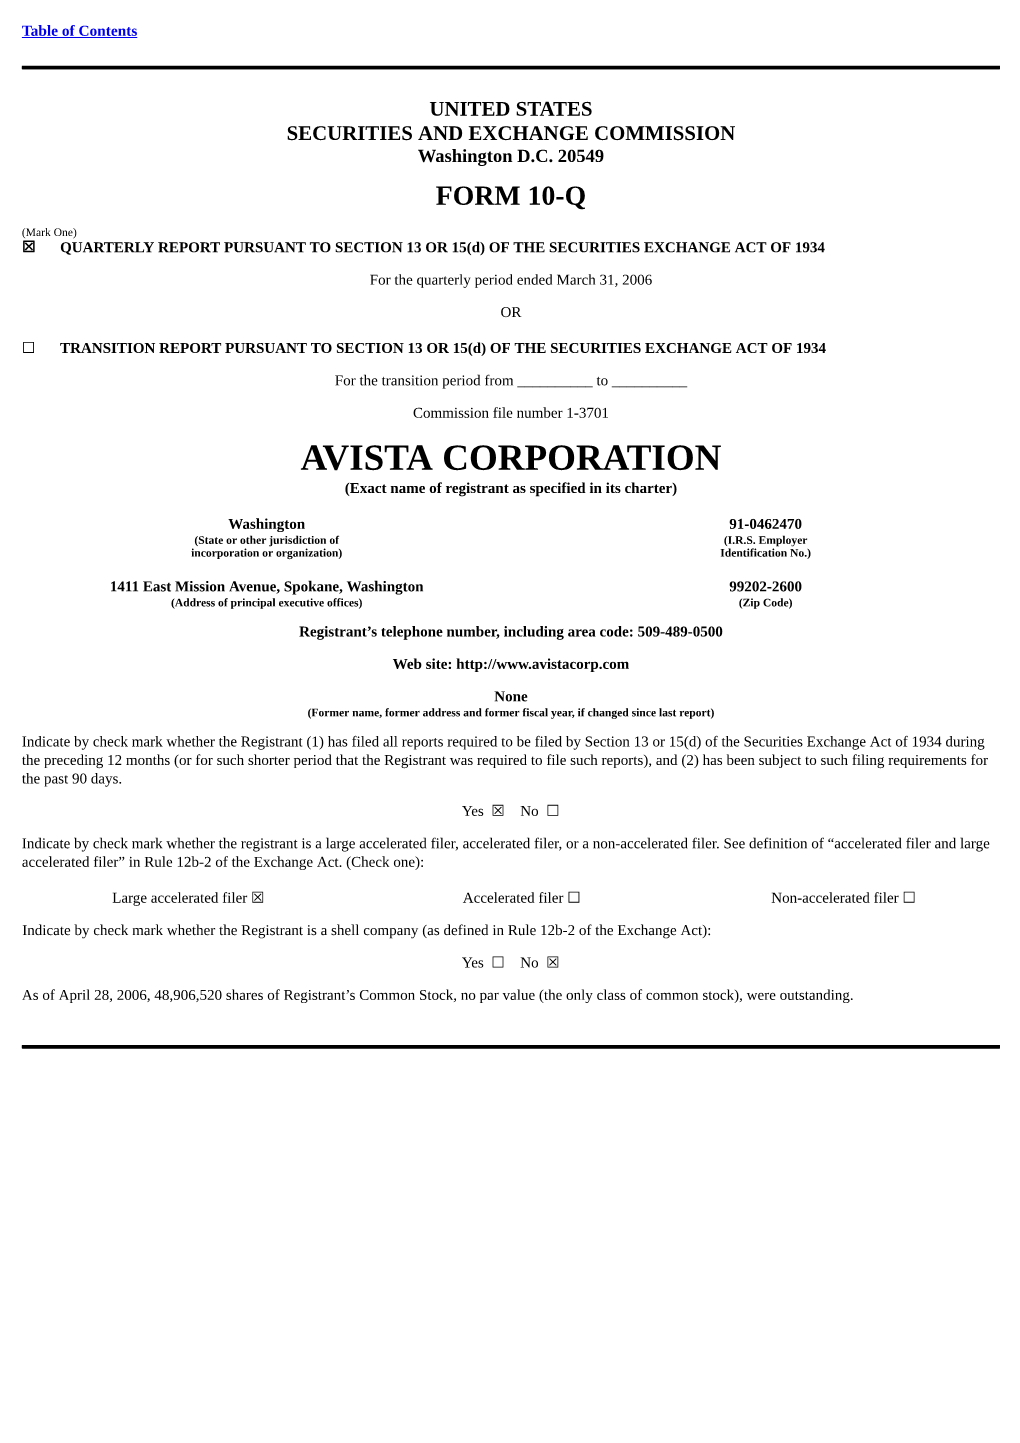 AVISTA CORPORATION (Exact Name of Registrant As Specified in Its Charter)